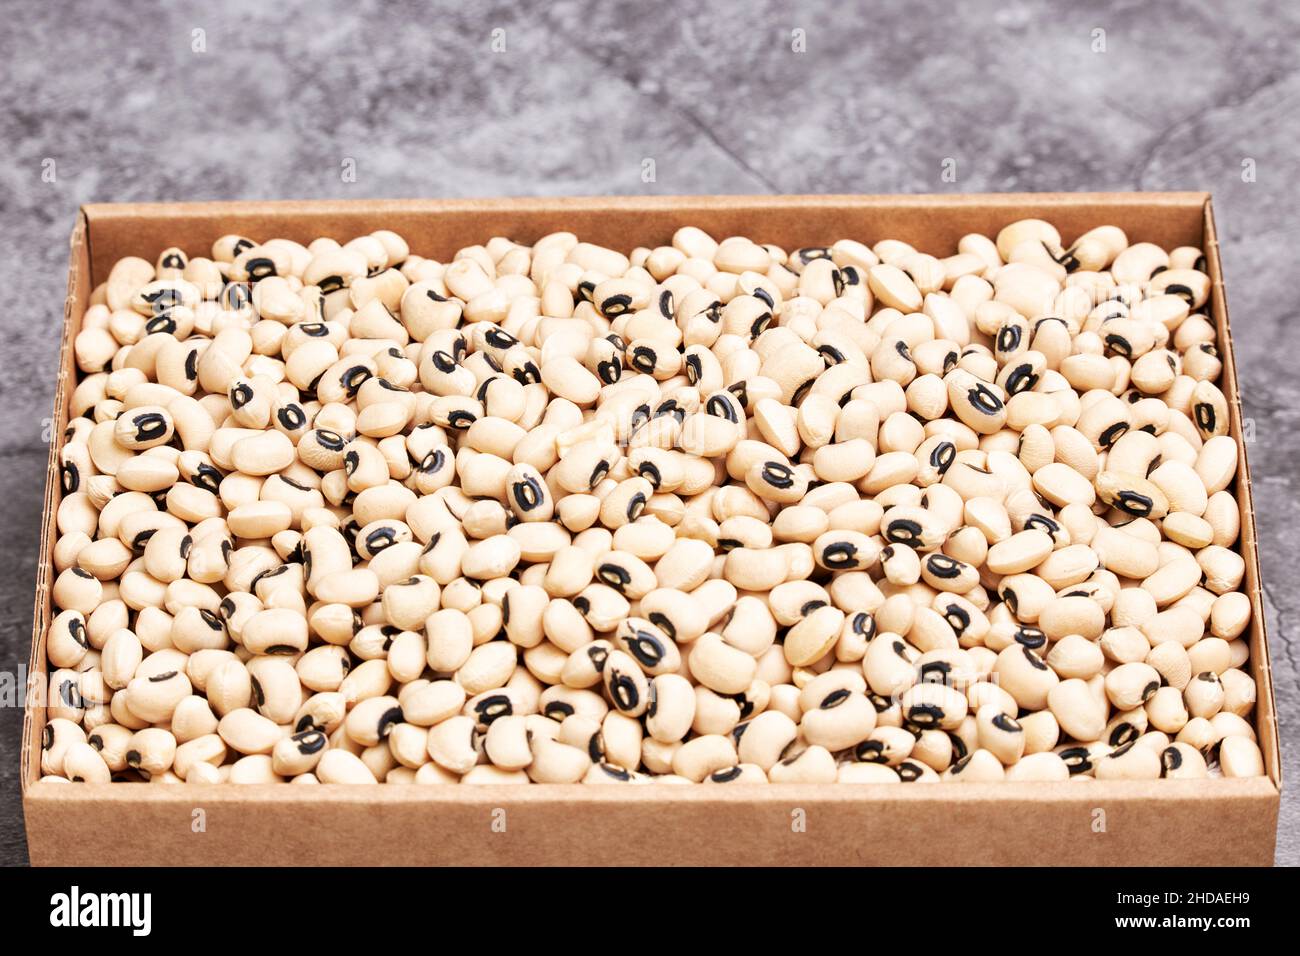 Pile of small raw white beans in a cardboard box on a gray stone background. Vegetarian health food Stock Photo